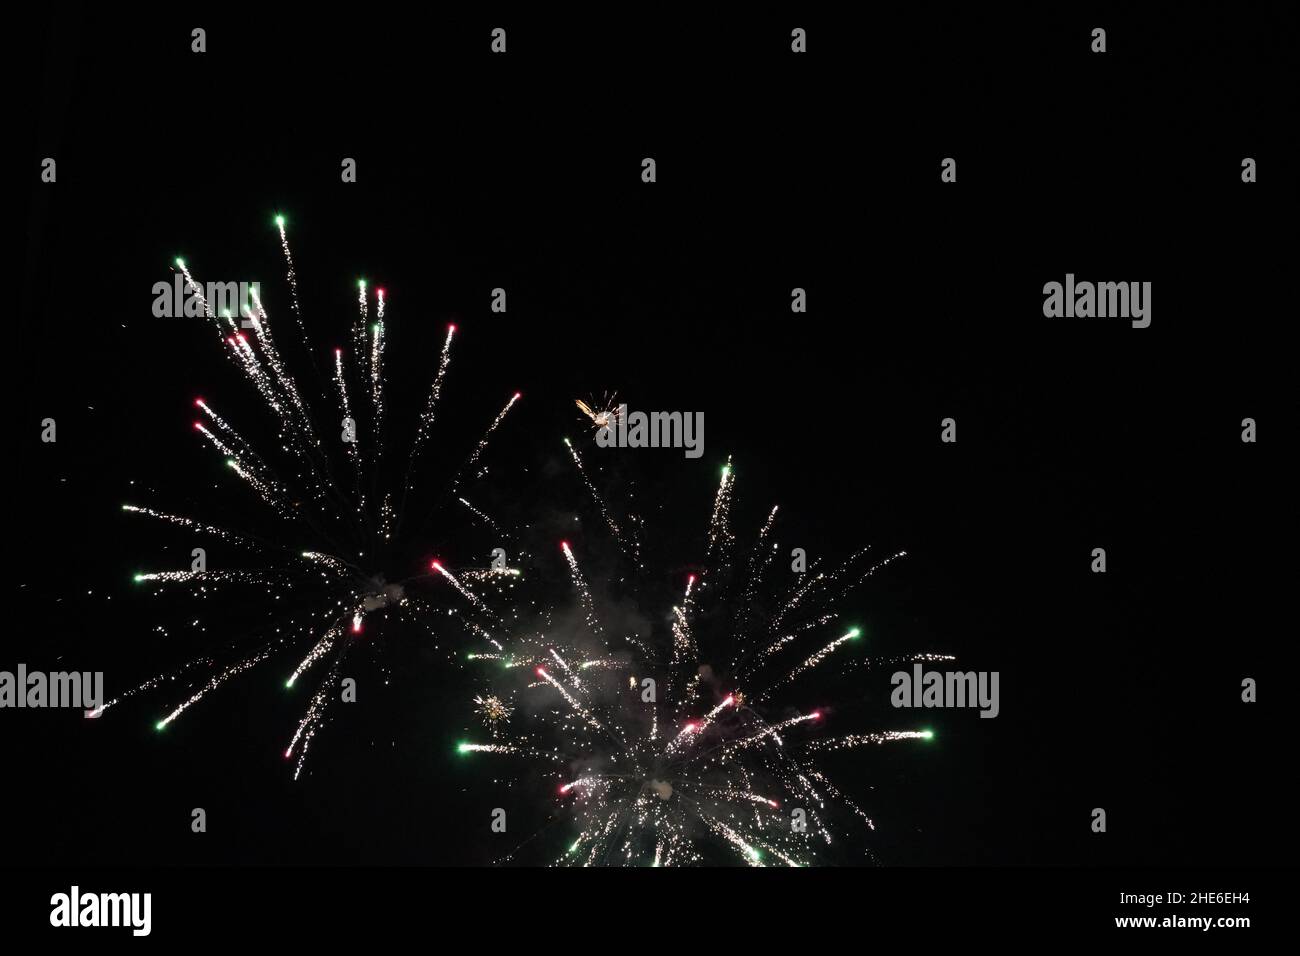 Exploding fireworks on black sky as background at midnight as part of celebration of new year or other festivals. Stock Photo